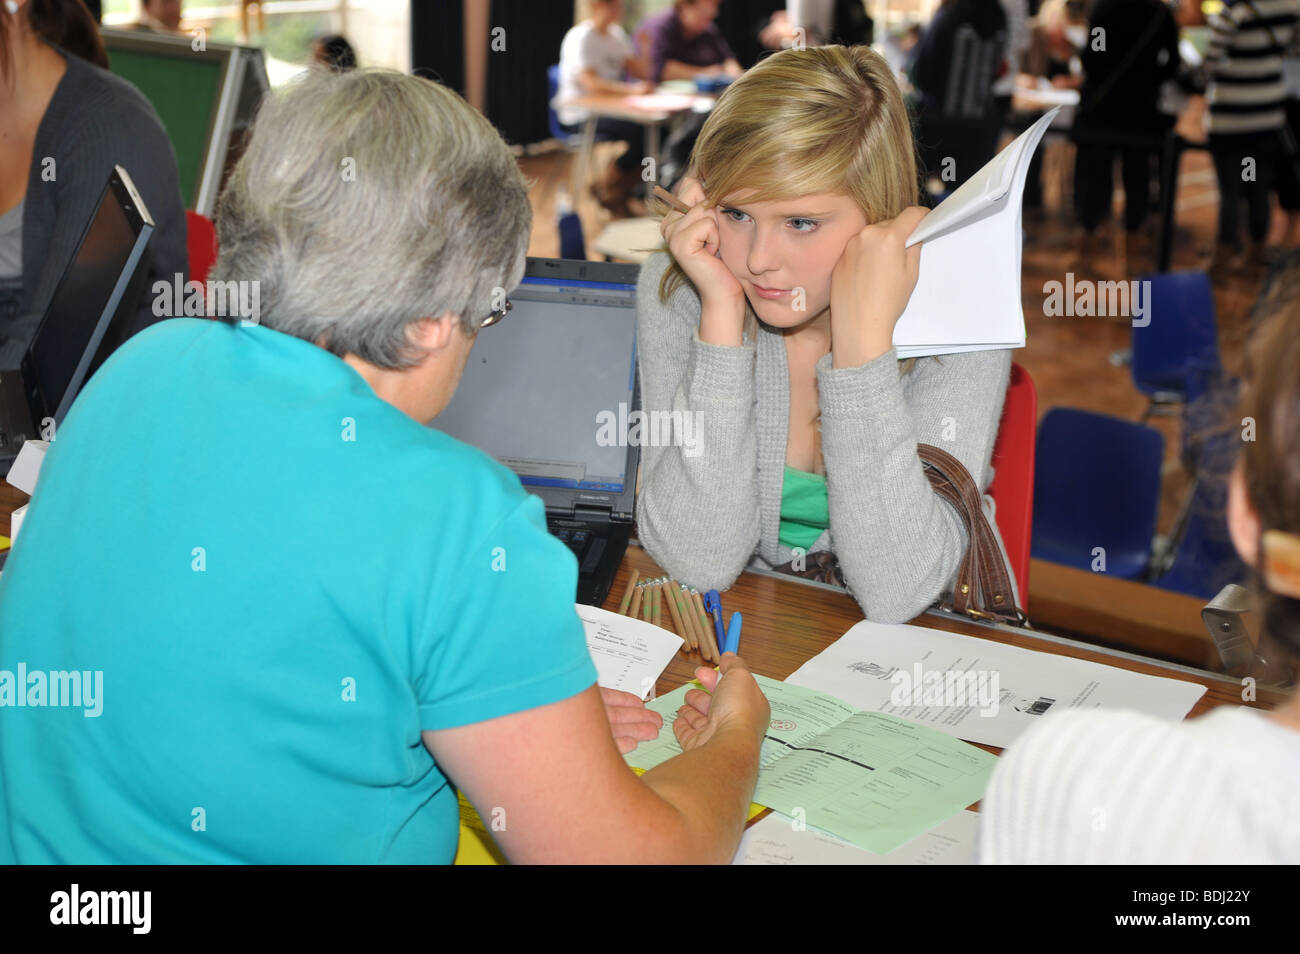 A school girl listening to an advisor after receiving her GCSE results Stock Photo